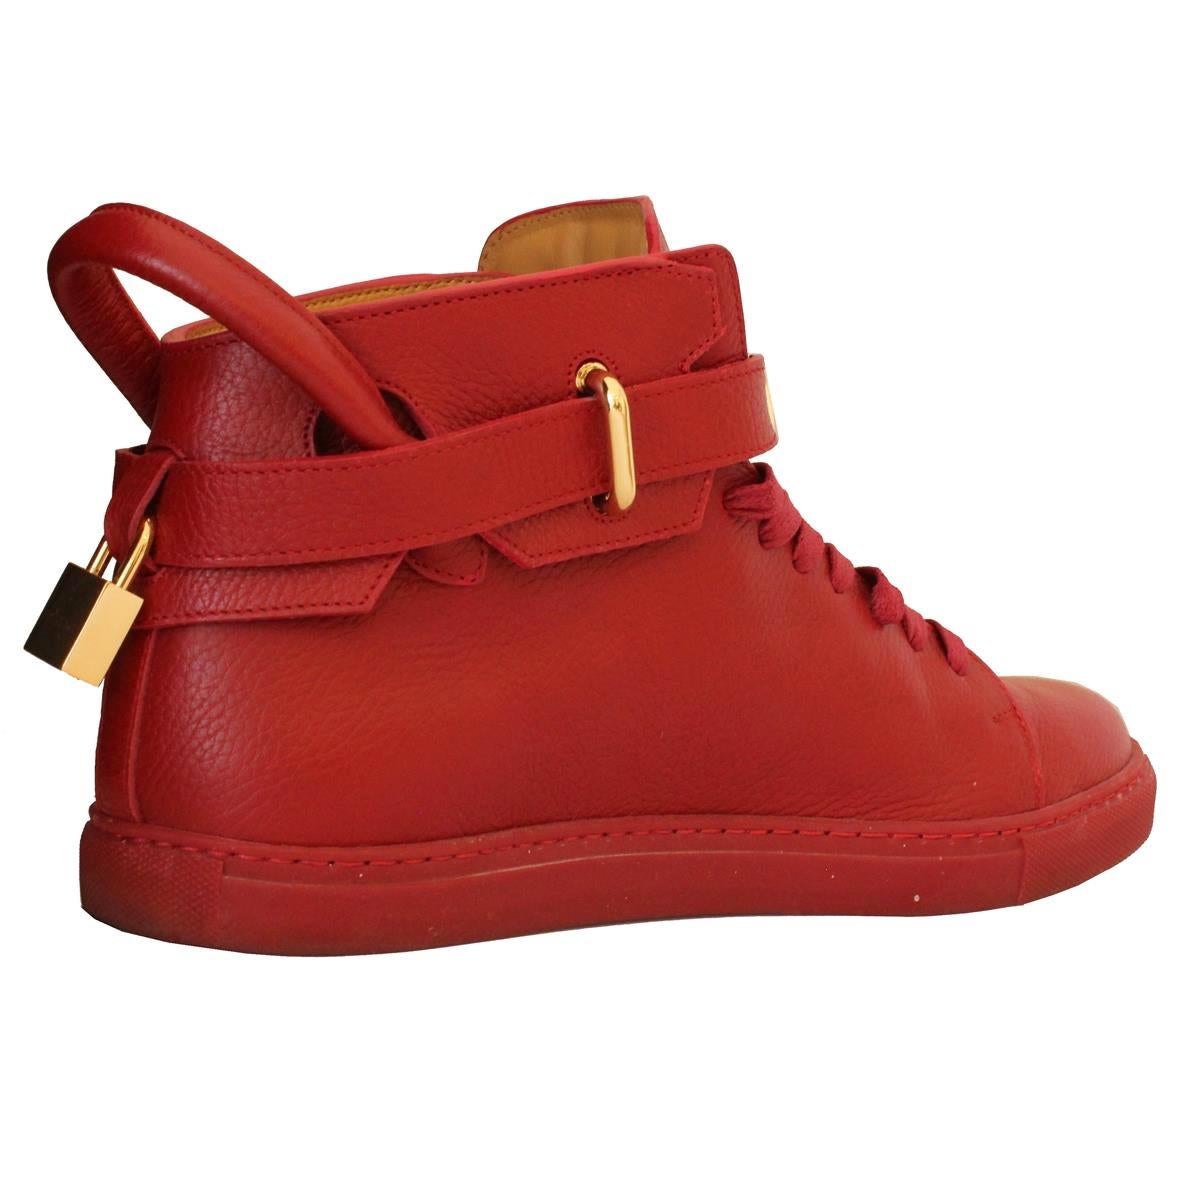 Wonderful and super quality Buscemi mens high sneakers
Leather 
Red color
Laced
Golden keys and locker
Worldwide express shipping included in the price !